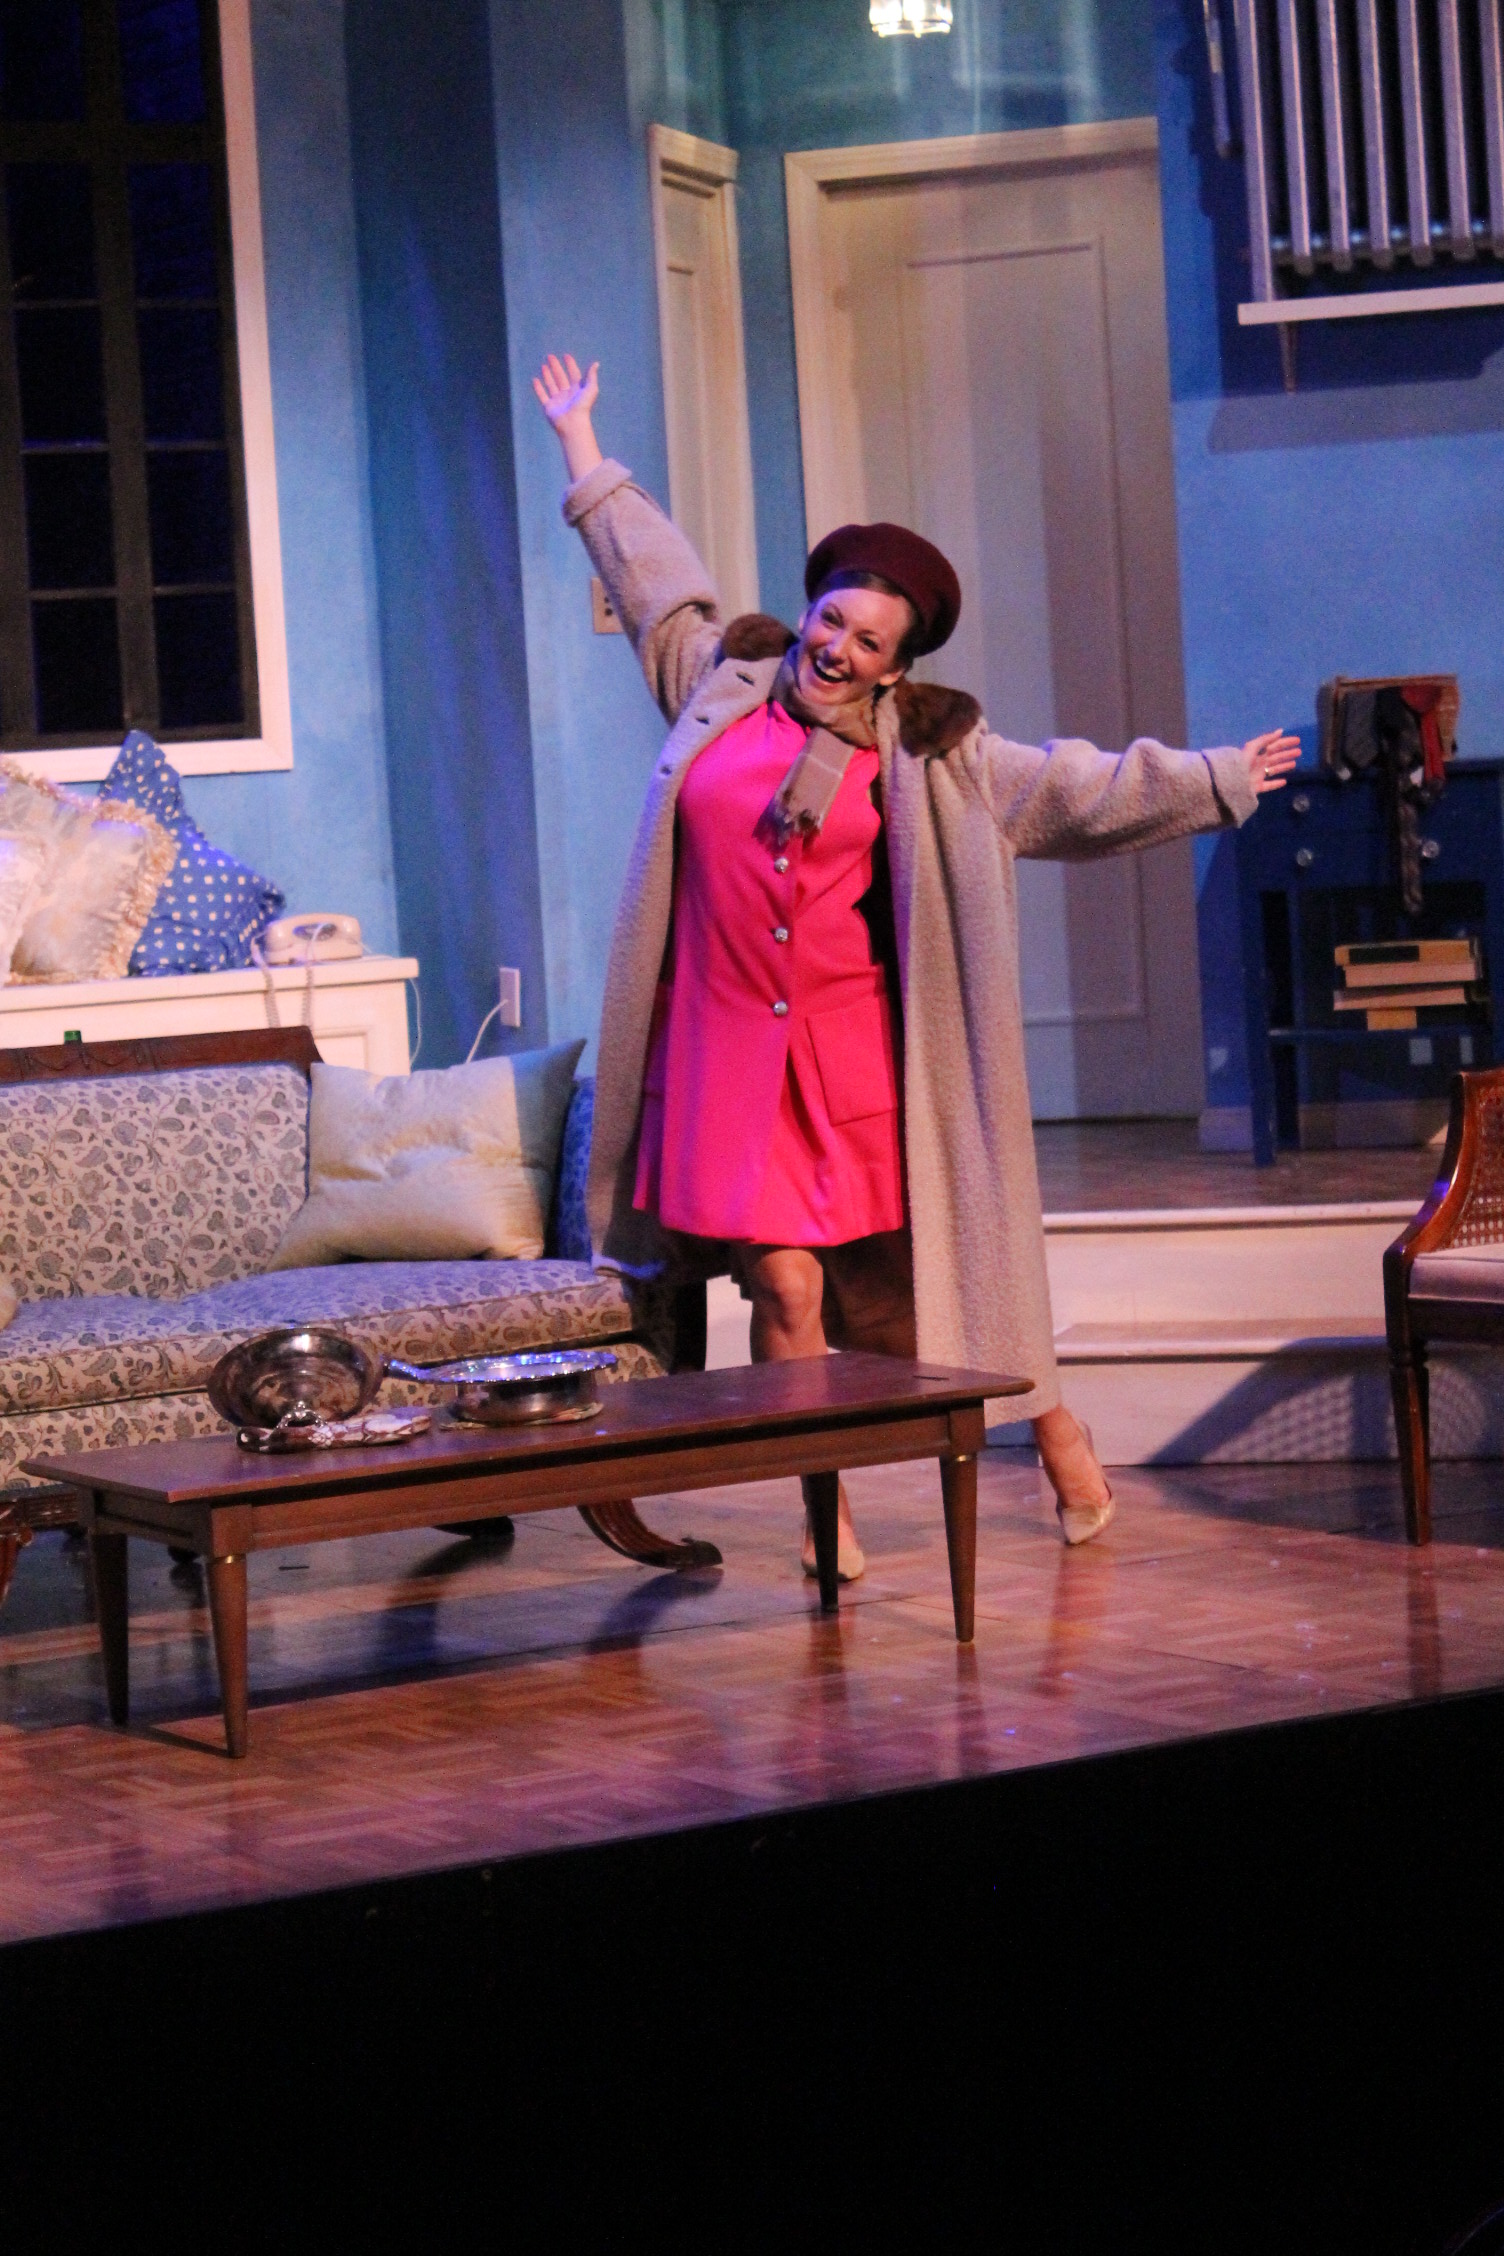 Julie as Corie in Barefoot in the Park, by Neil Simon at Winnipesaukee Playhouse, Summer 2013